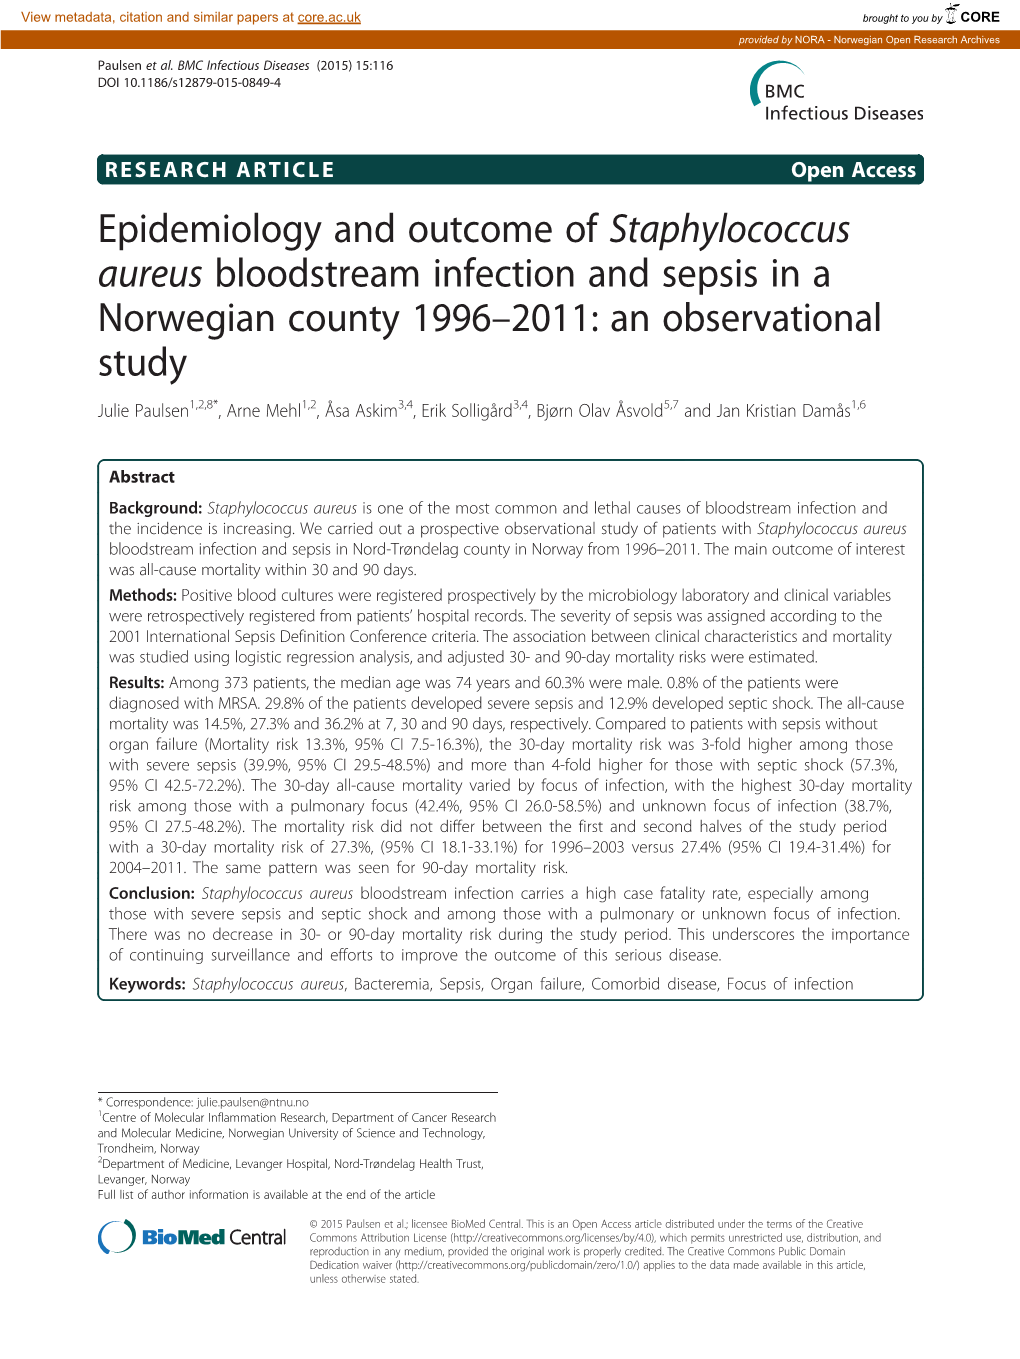 Epidemiology and Outcome of Staphylococcus Aureus